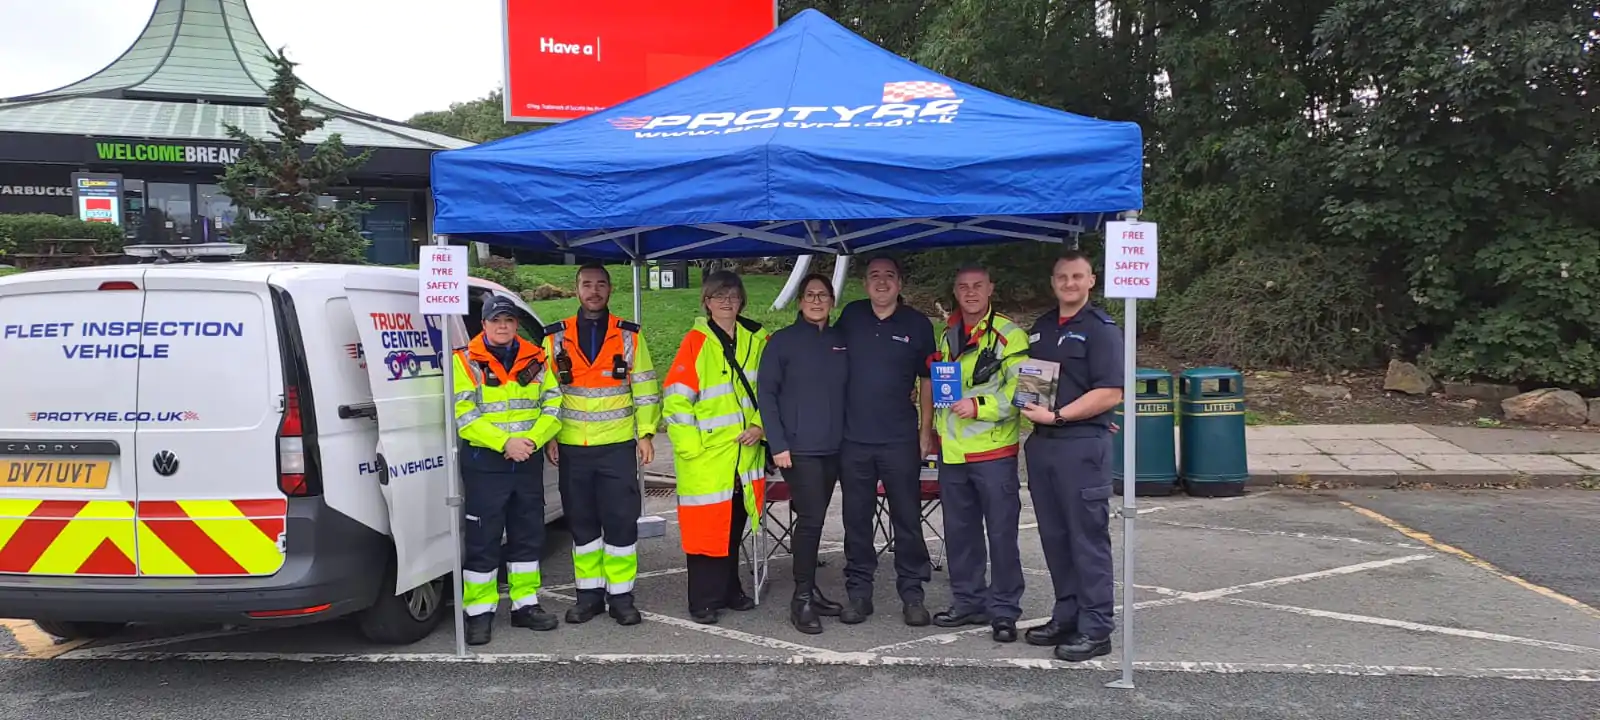 TyreSafe joins Operation Pennine in mission to promote road safety